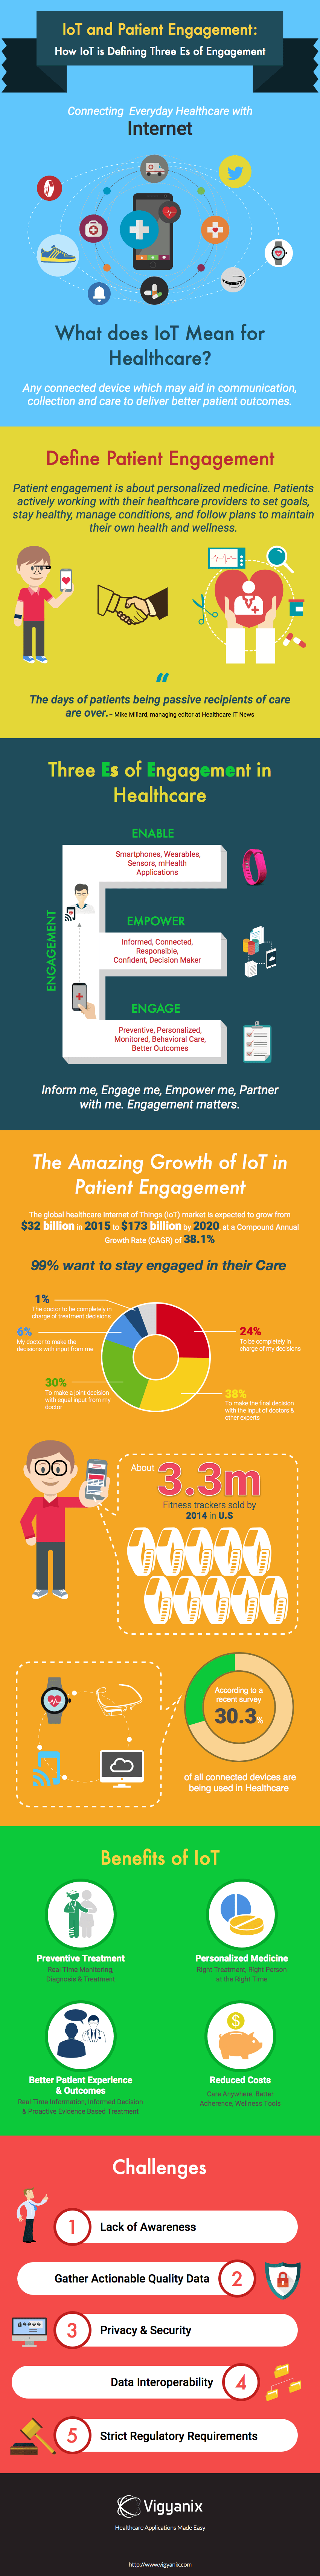 how to leverage the internet of things for patient engagement 